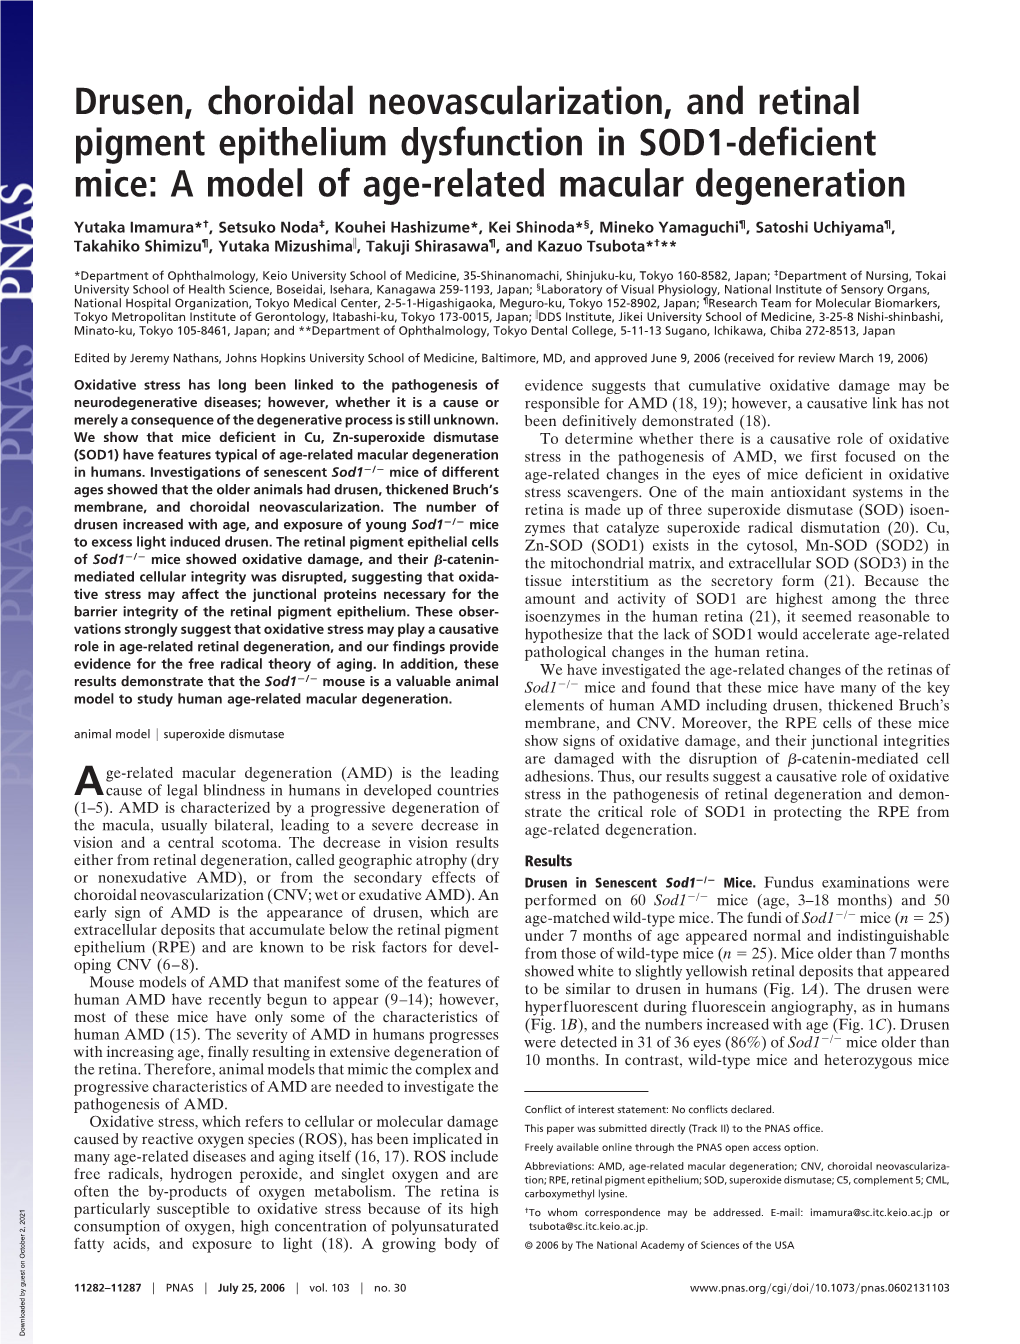 Drusen, Choroidal Neovascularization, and Retinal Pigment Epithelium Dysfunction in SOD1-Deficient Mice: a Model of Age-Related Macular Degeneration